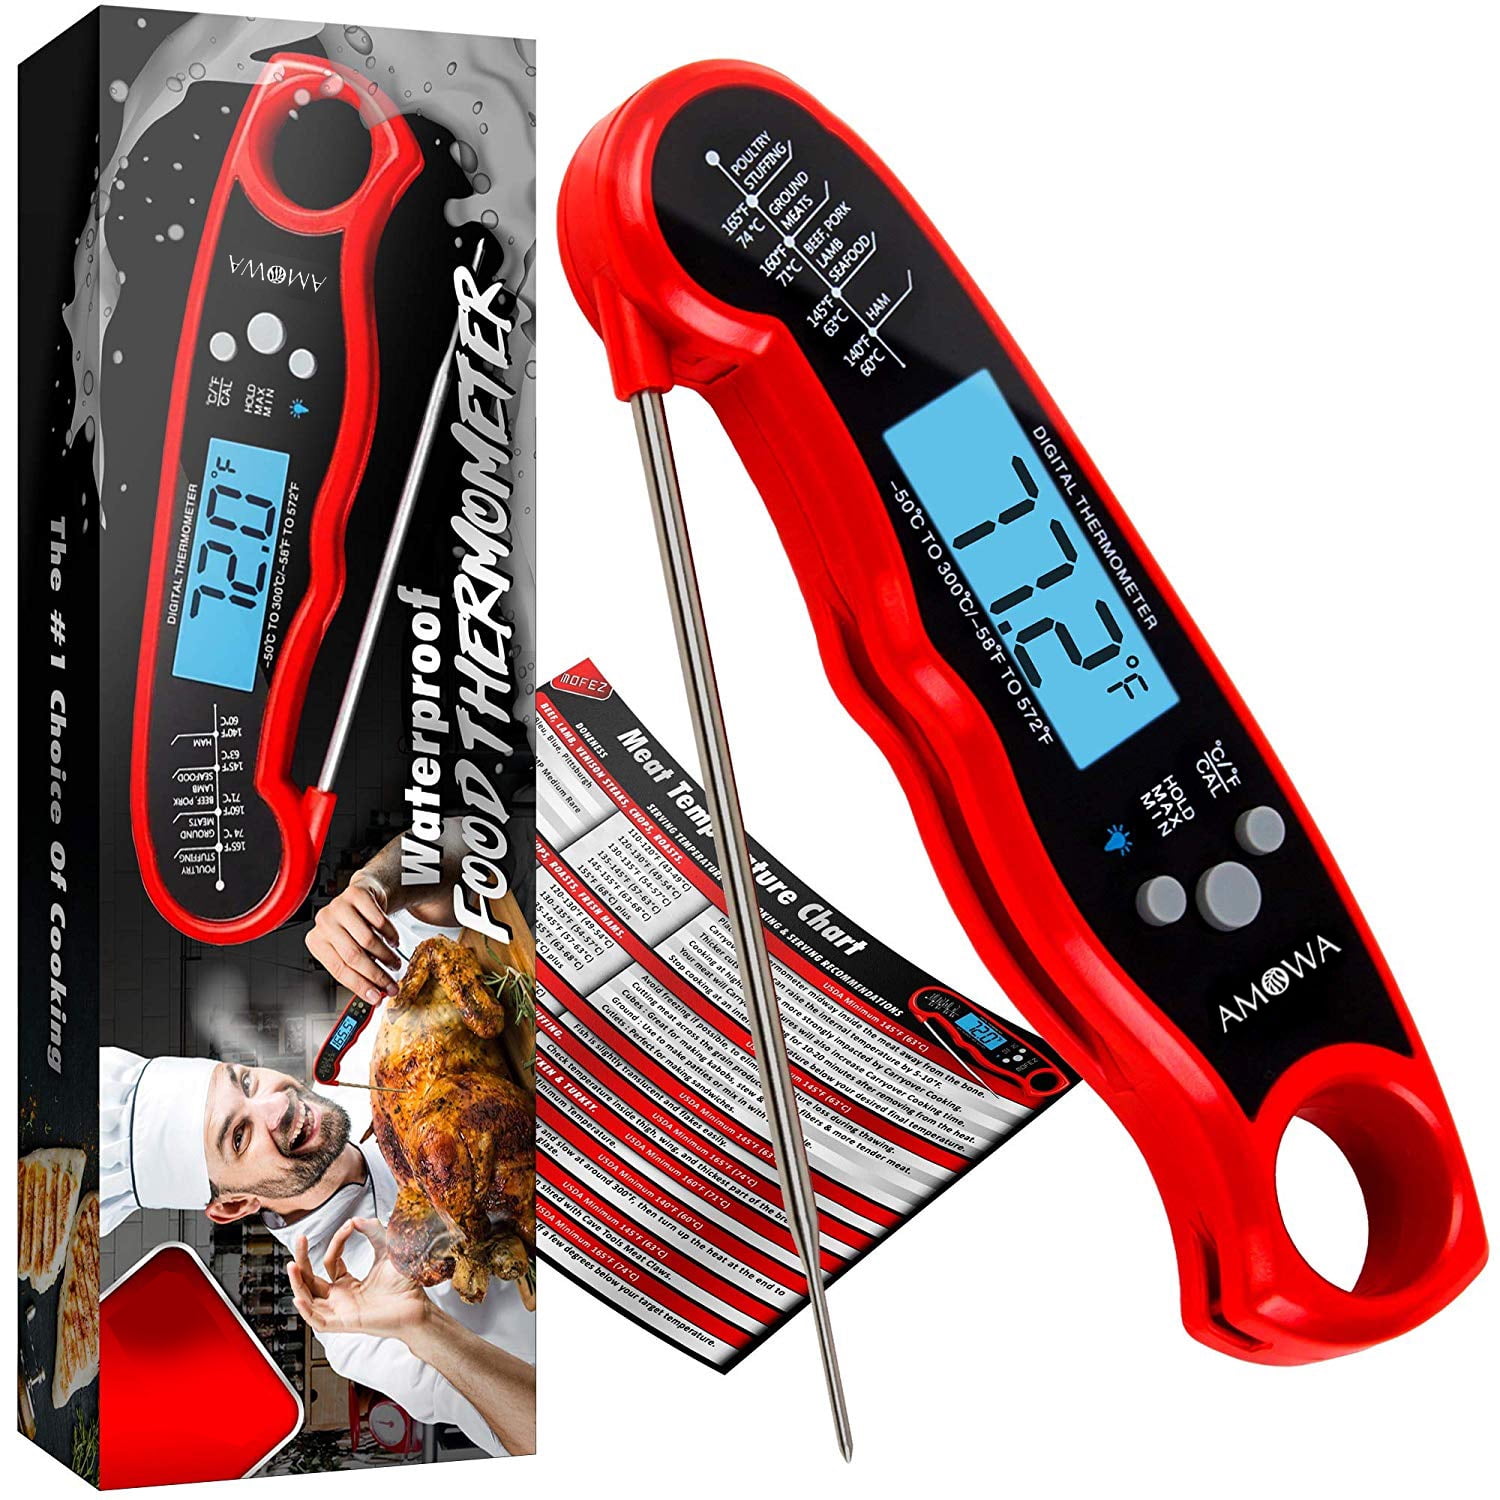 Expert Grill Thermometer Instant Read Expert Grill Food and BBQ 58 F 572 F 